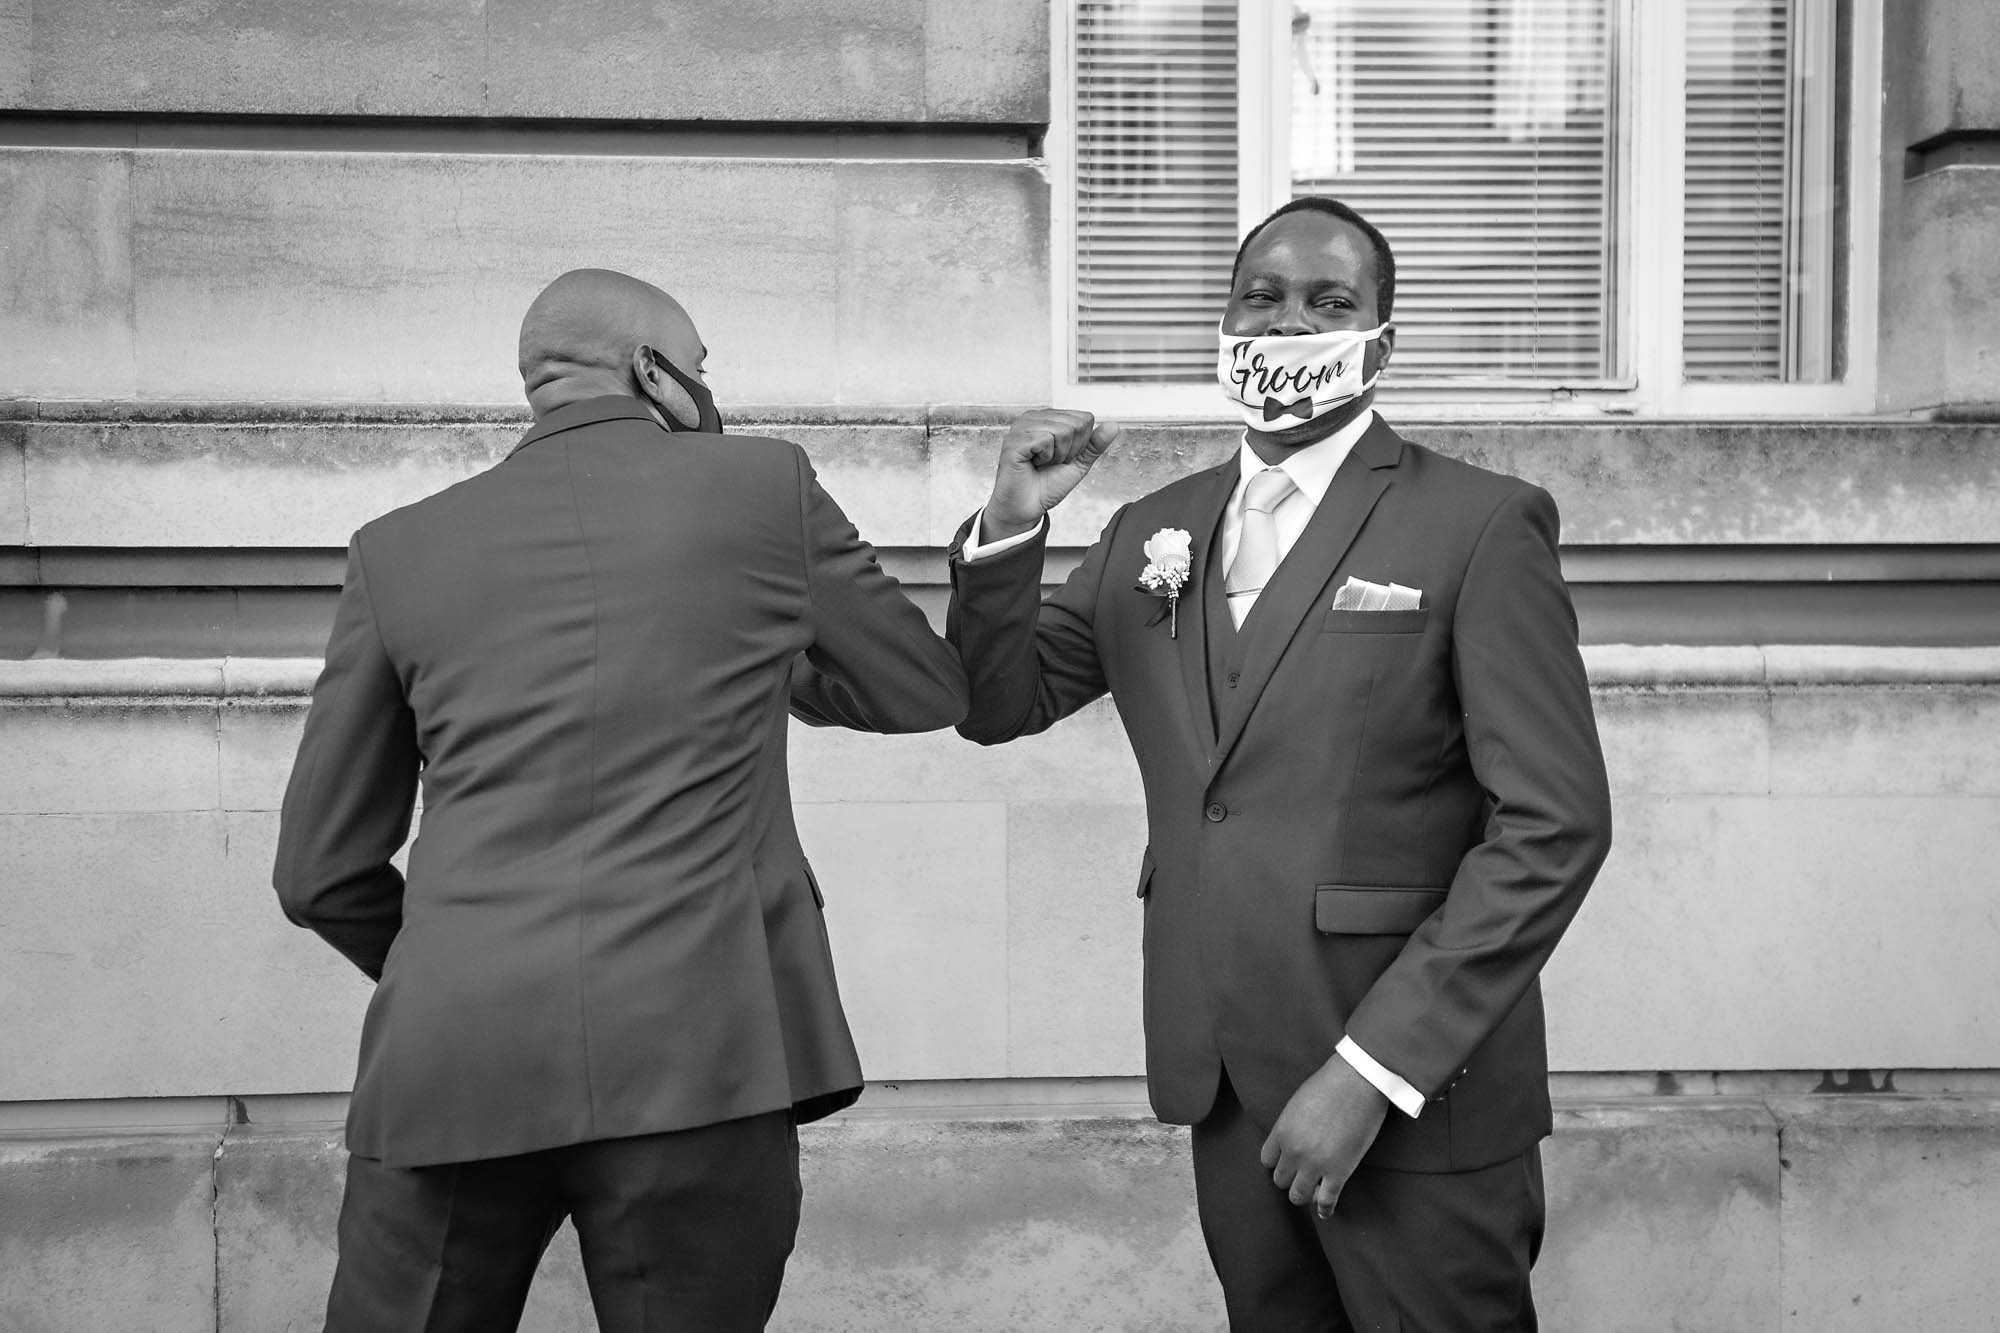 A masked groom elbow bumps a friend at his Cov-19 restricted wedding